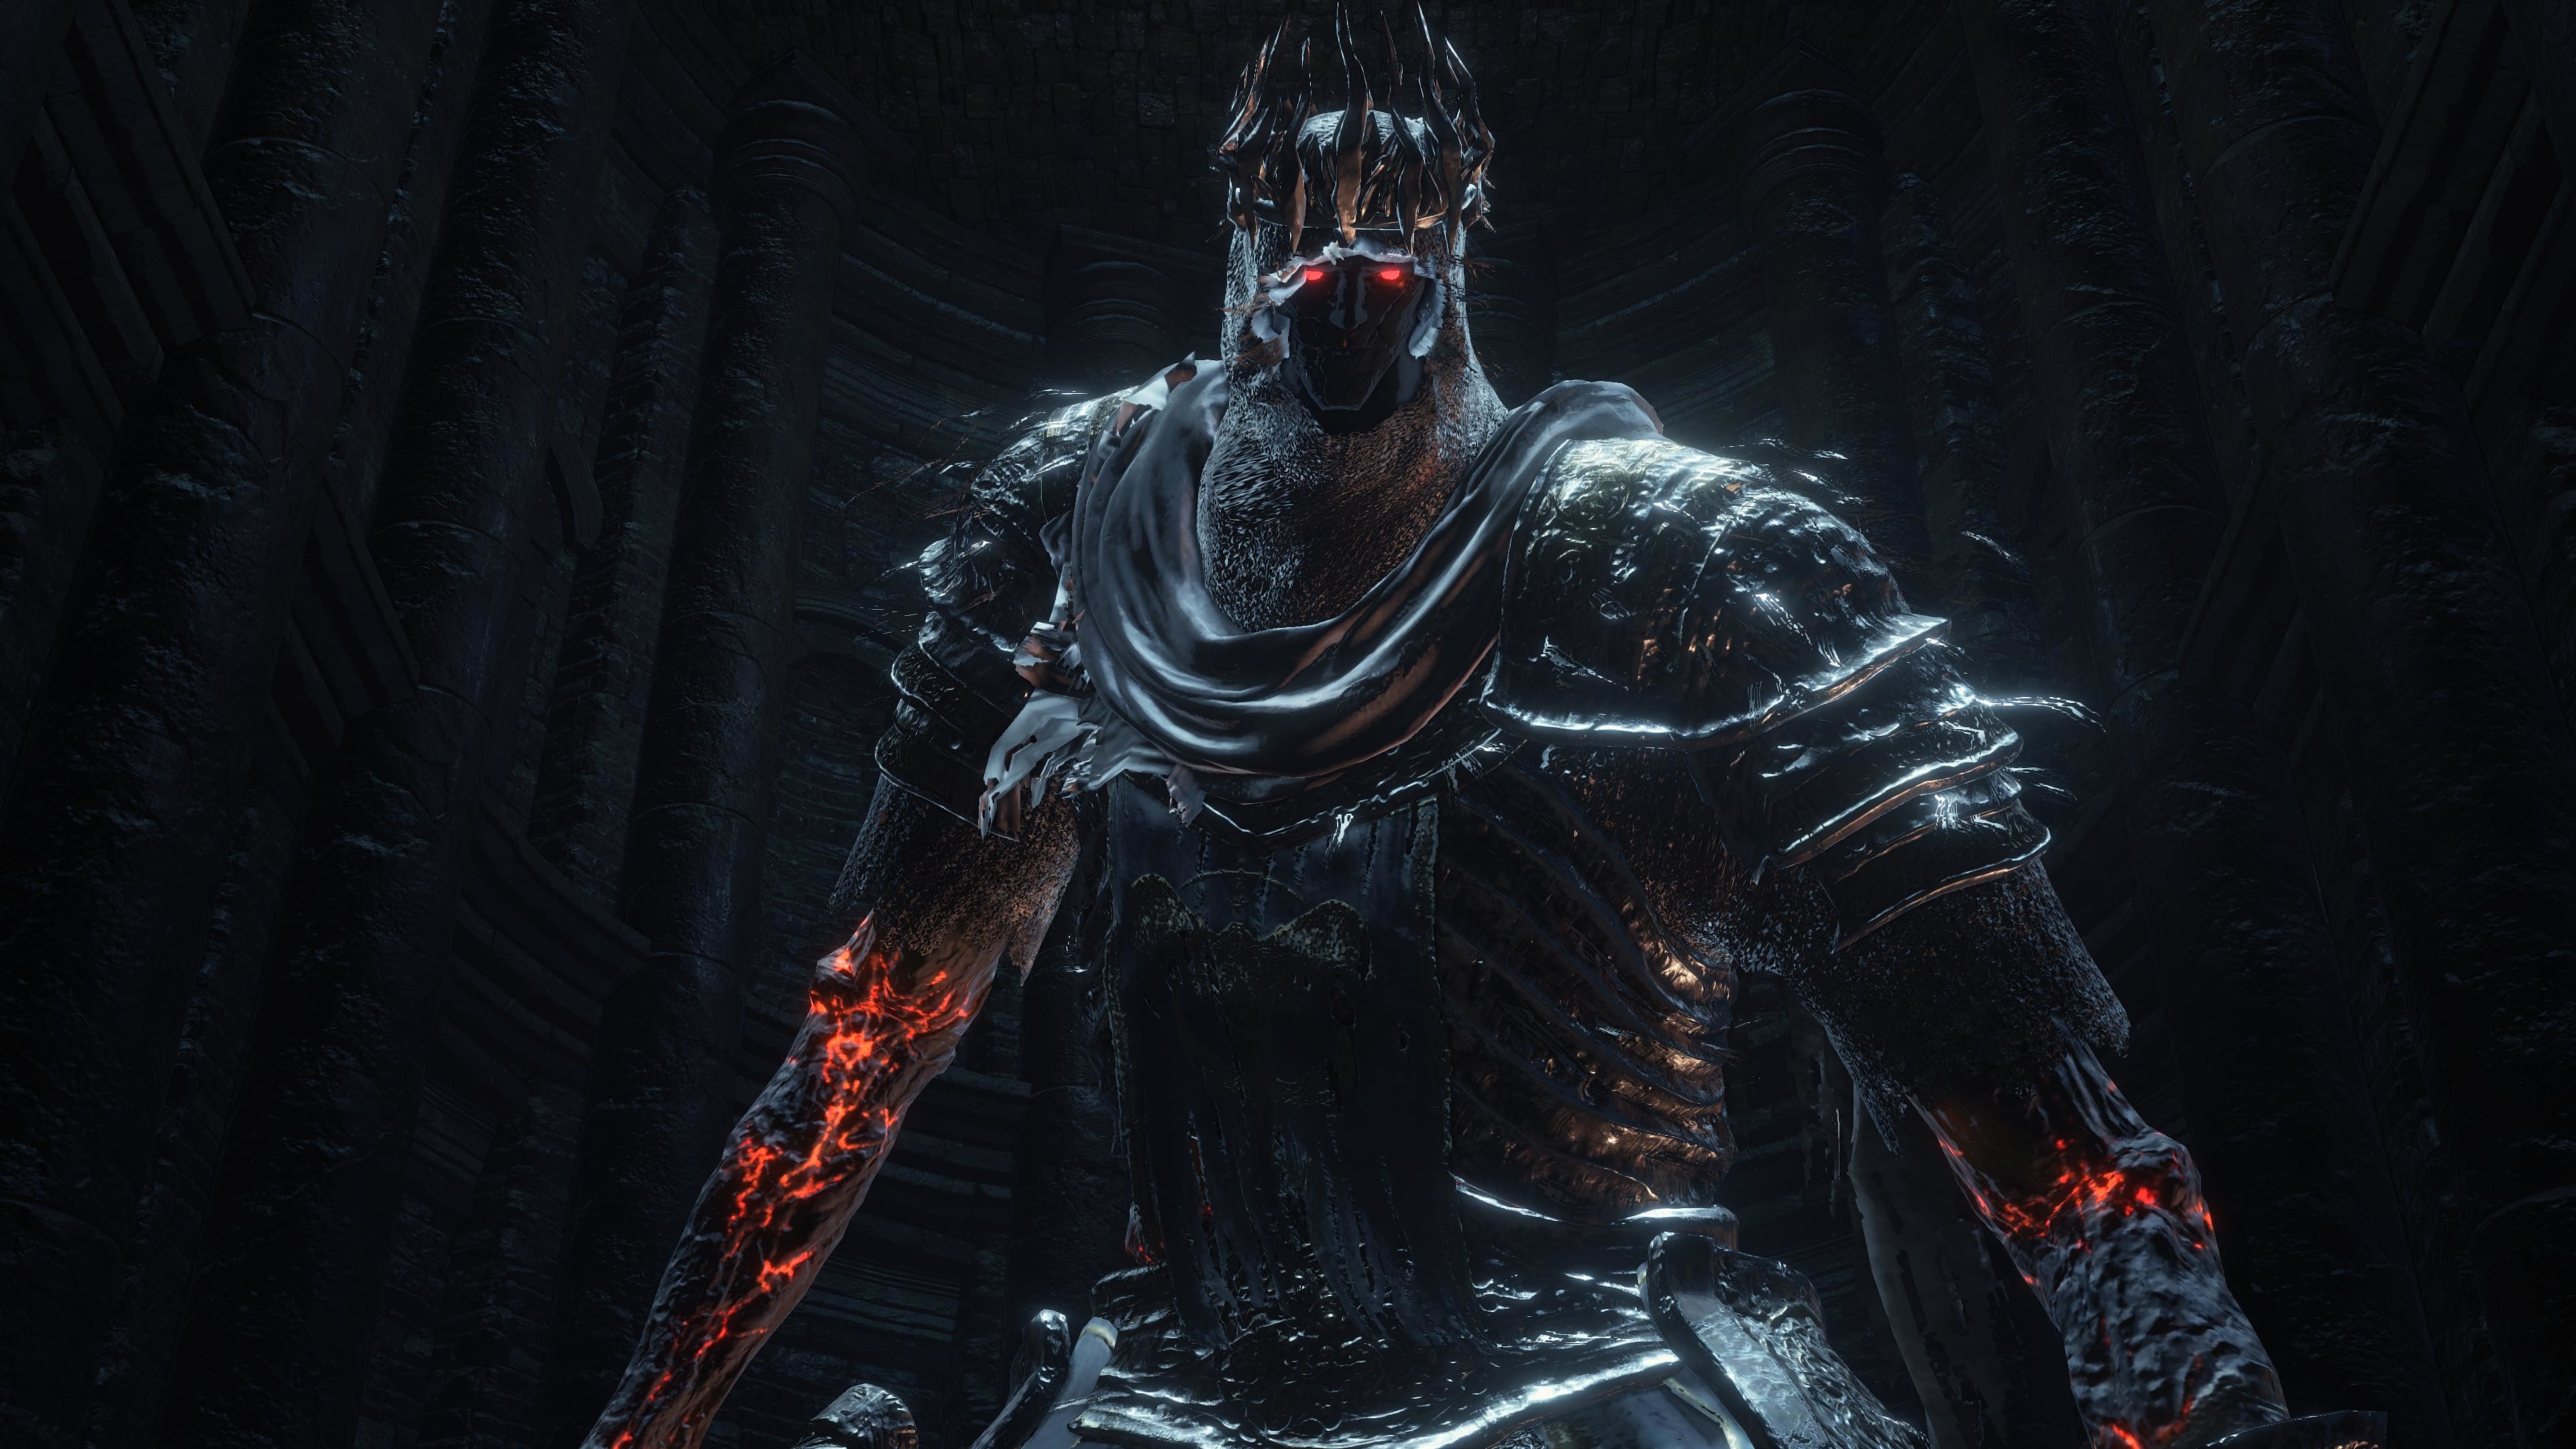 3840x2160 ... Dark Souls 3 4K Pic 29 Yhorm the Giant 2 by user619